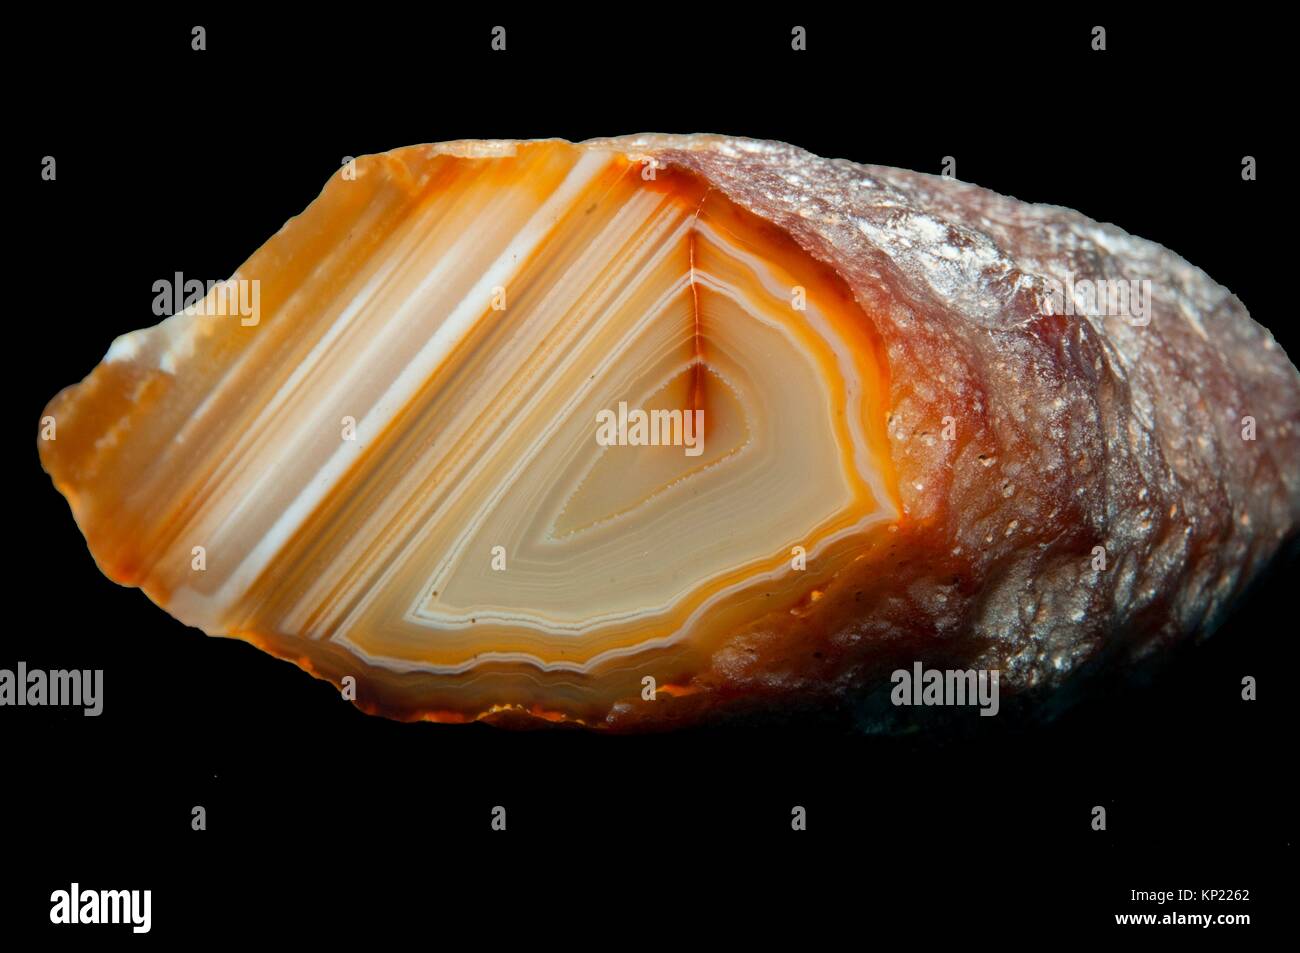 Agate Stone High Resolution Stock Photography and Images - Alamy